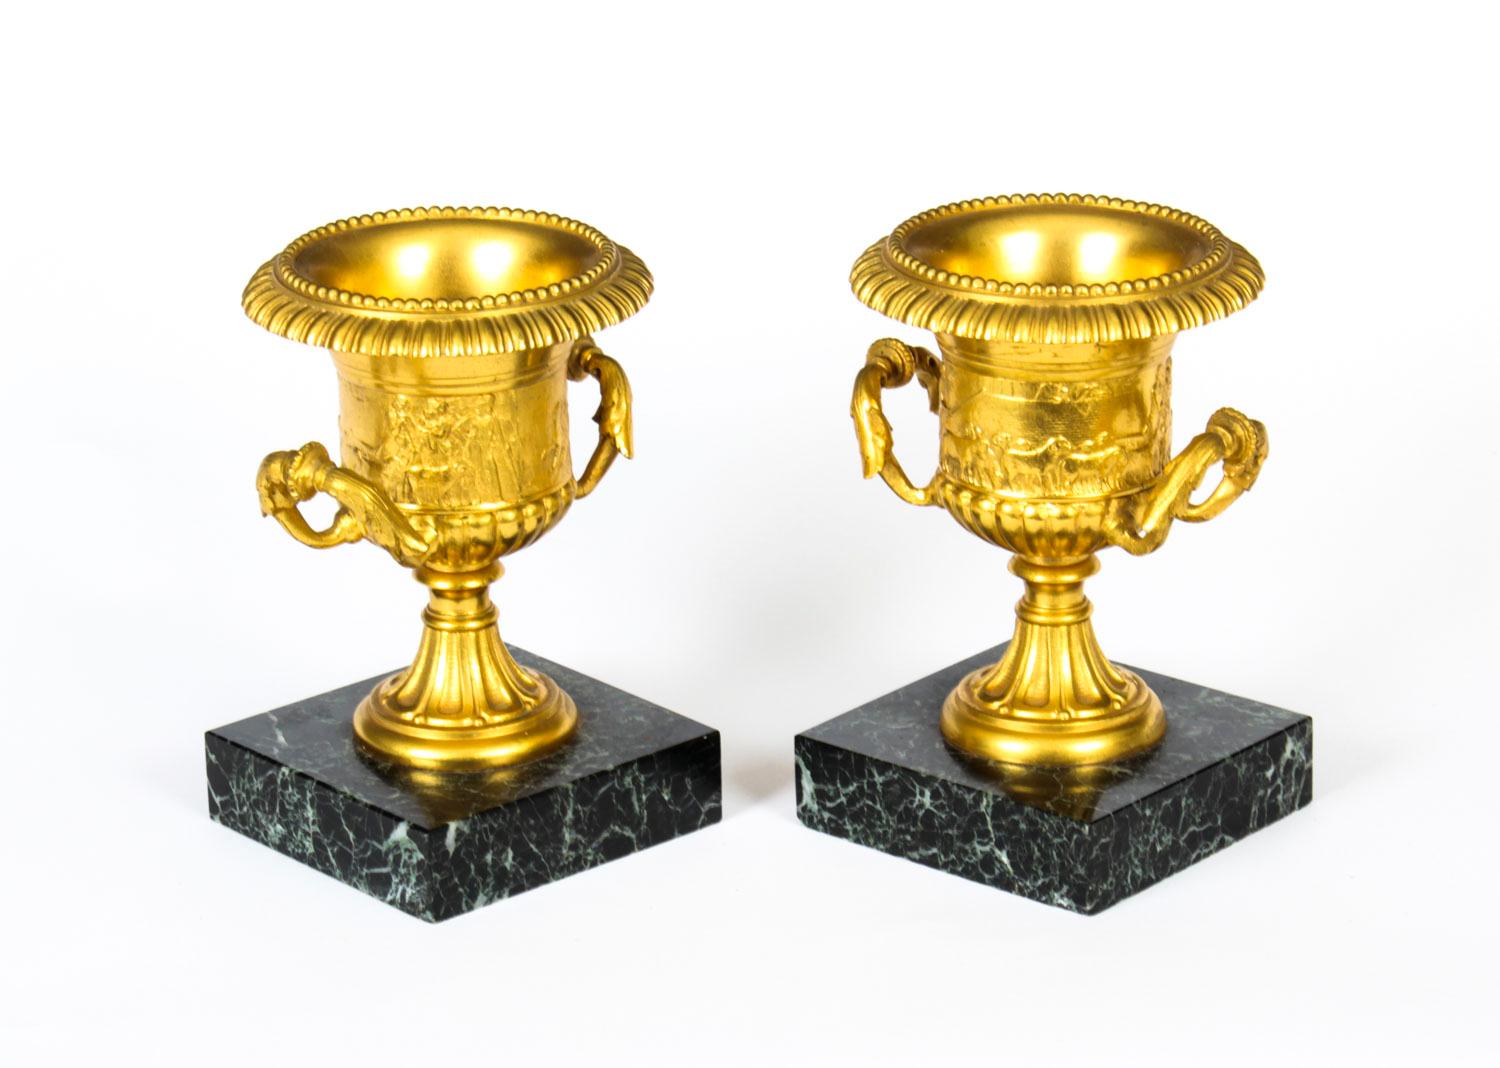 This is a remarkable pair of antique gilt bronze ormolu Italian Grand Tour classical urns, circa 1860 in date.
 
These stunning urns have been superbly cast and have scenes depicting a man rowing his boat with a dog, a farmer with a herd of goats